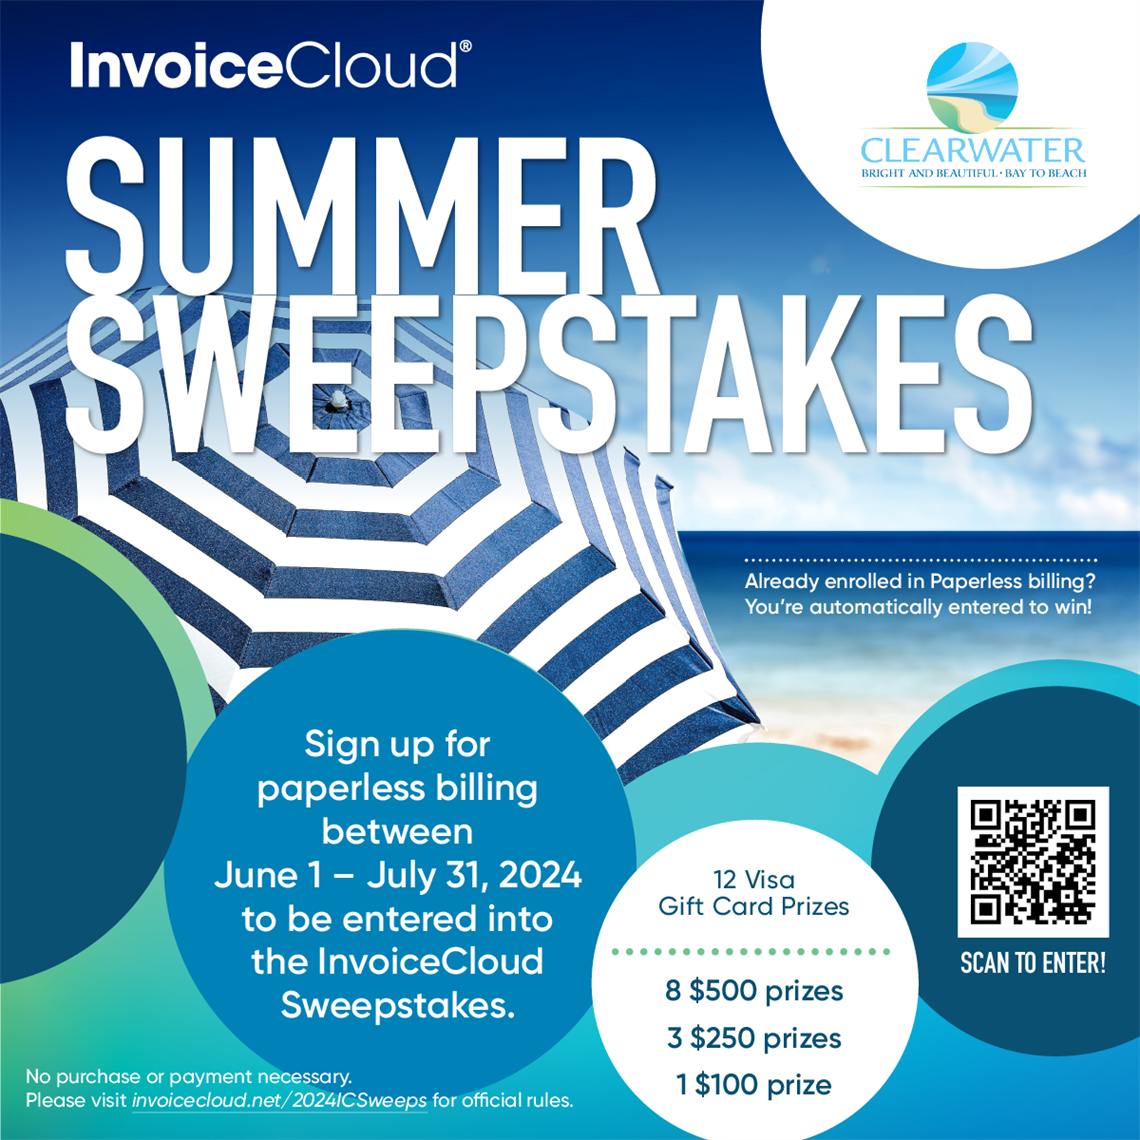 Graphic about InvoiceCloud summer sweepstakes for signing up for paperless billing